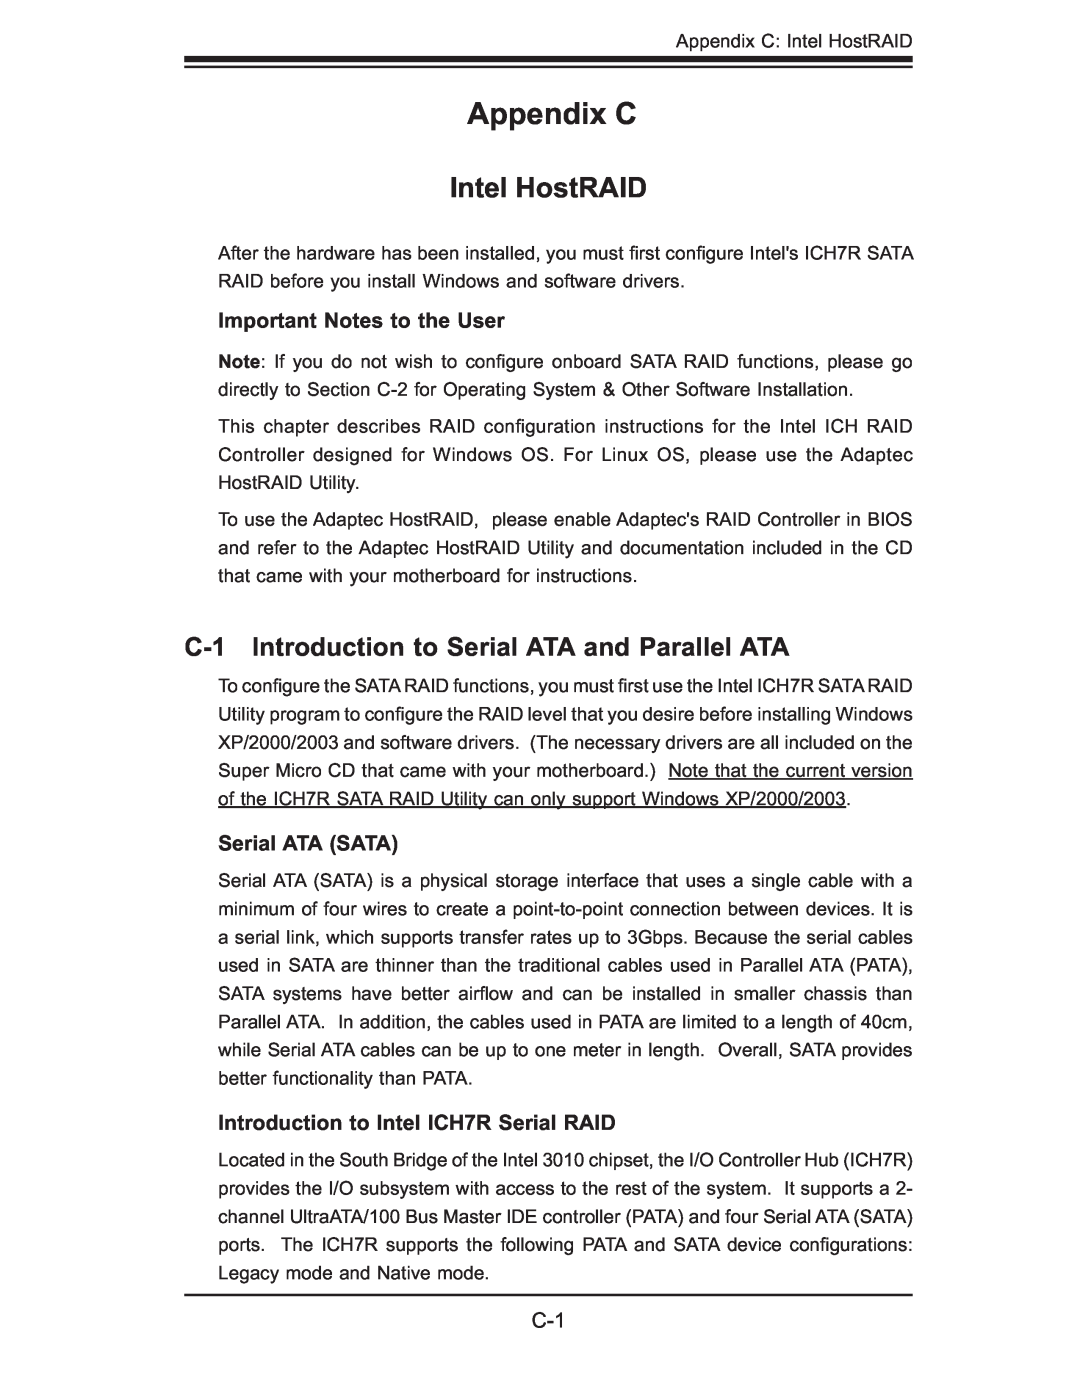 SUPER MICRO Computer 5015M-UR Intel HostRAID, C-1 Introduction to Serial ATA and Parallel ATA, Important Notes to the User 